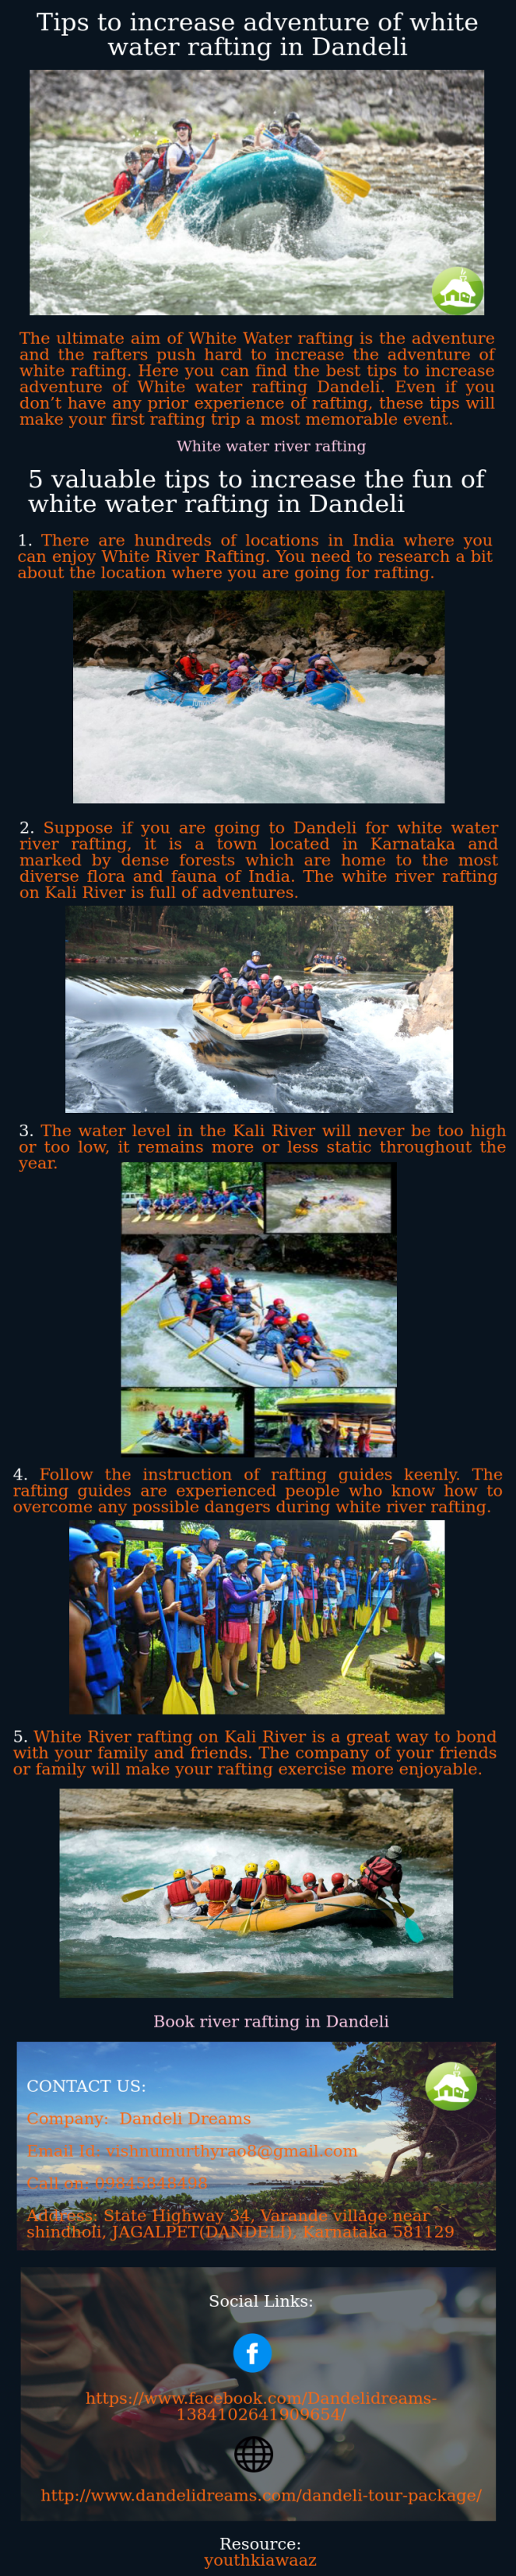 Valuable tips to increase the fun in white water rafting